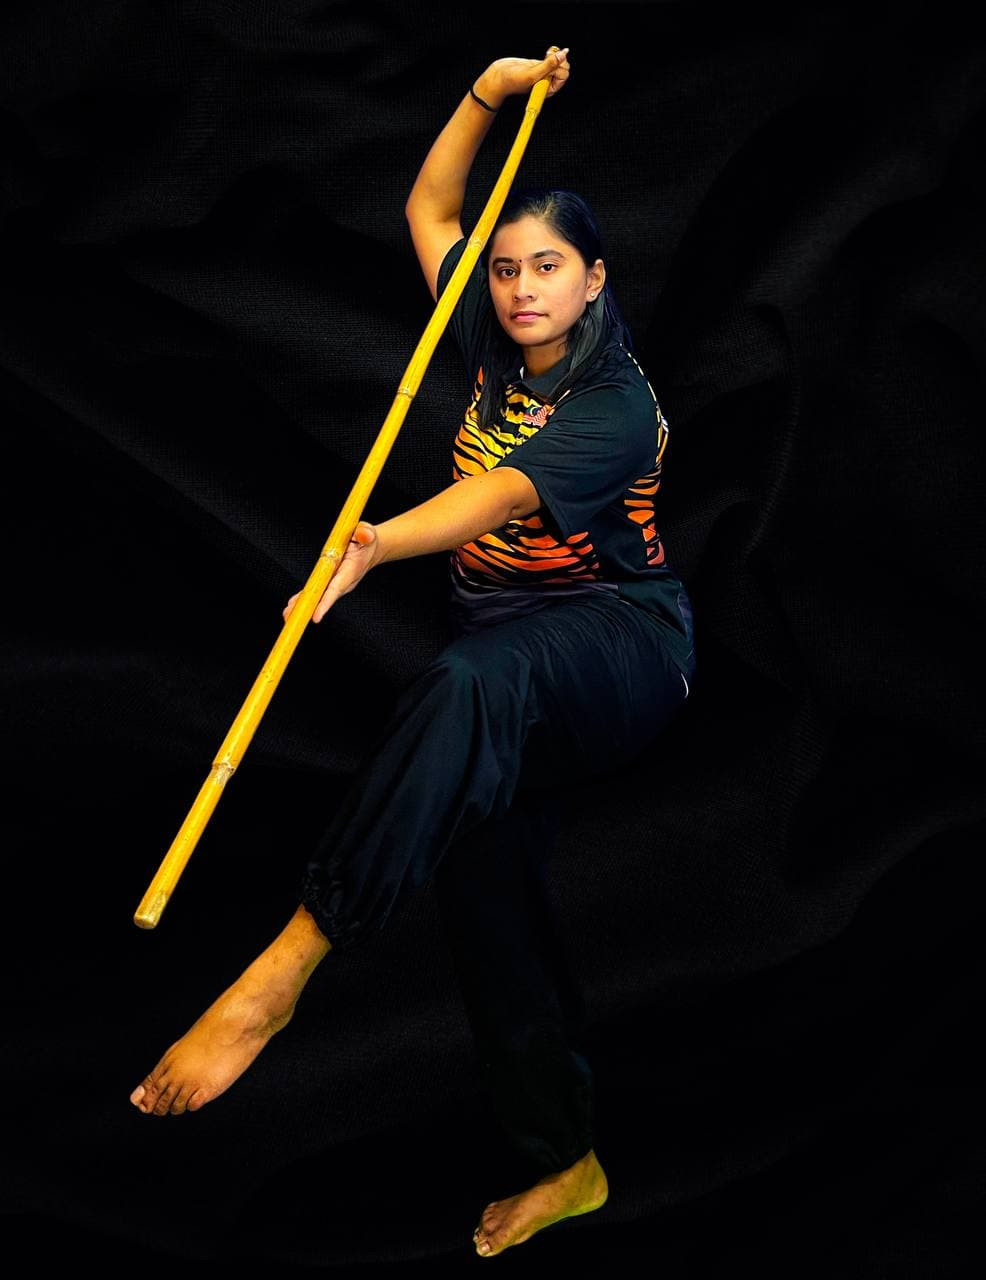 Kaviarasi says making her mark in the Malaysian Book of Records has further motivated her to inspire others to take up the weapon-based Indian martial art.